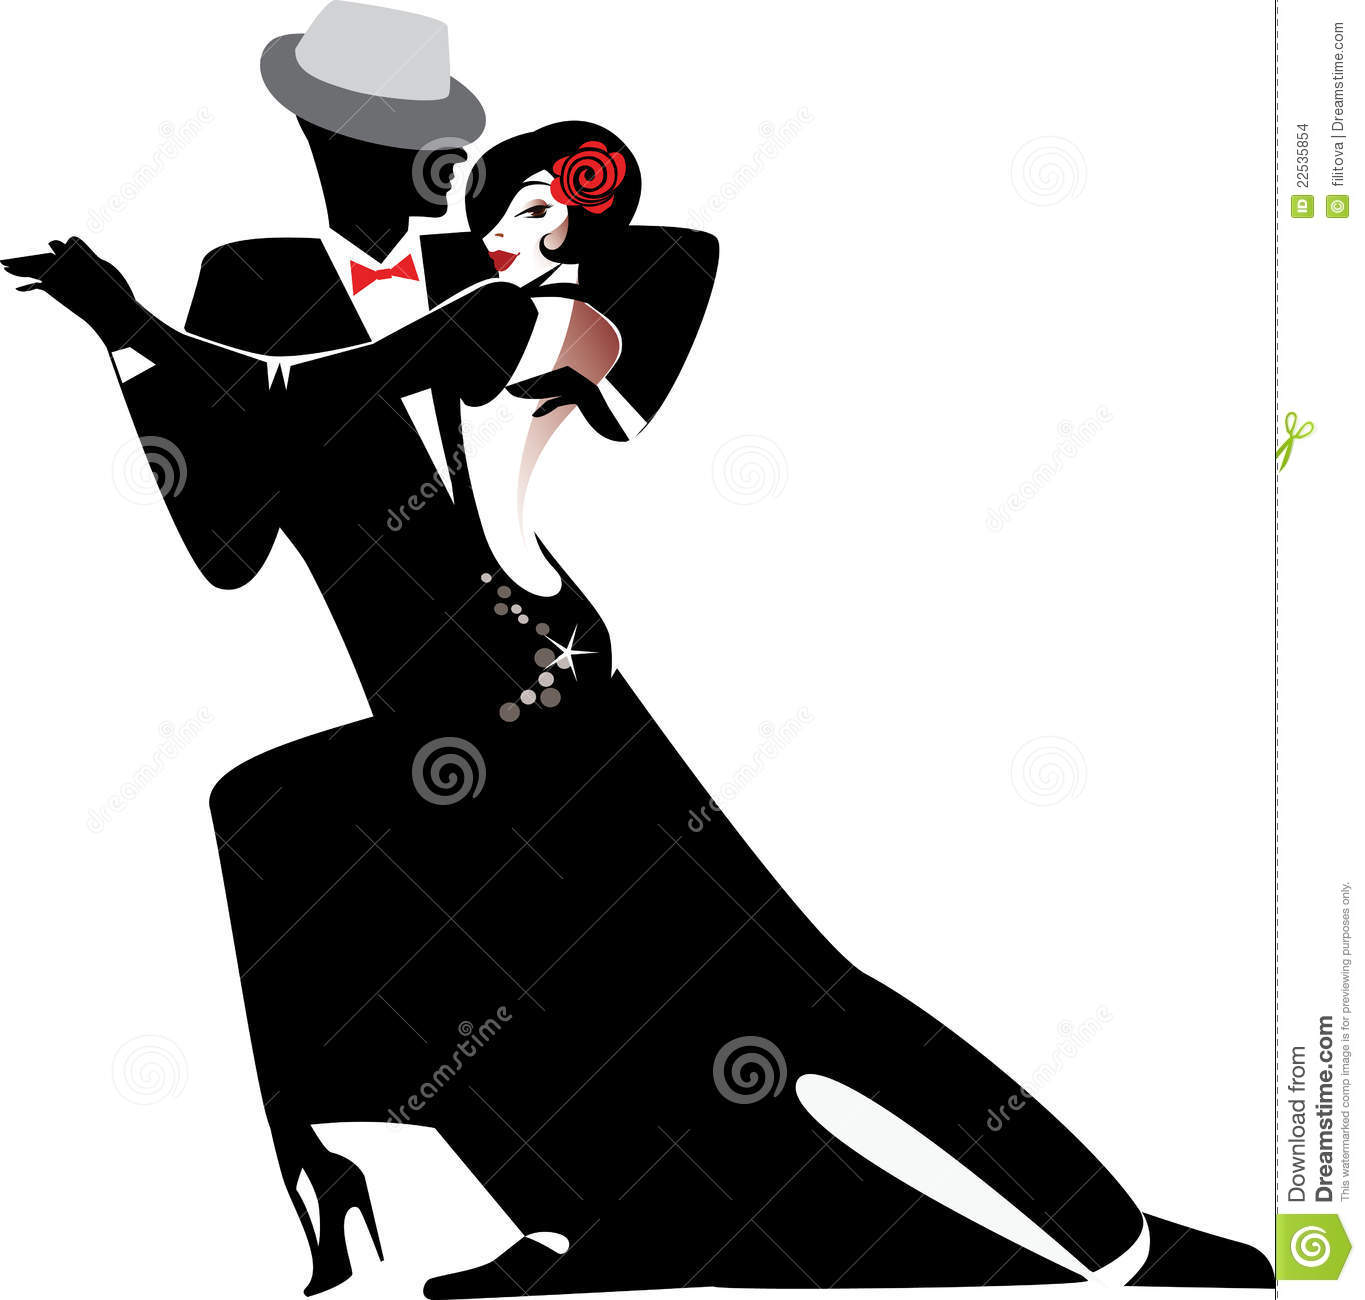 More Similar Stock Images Of   Silhouette Of Couple Dancing Tango